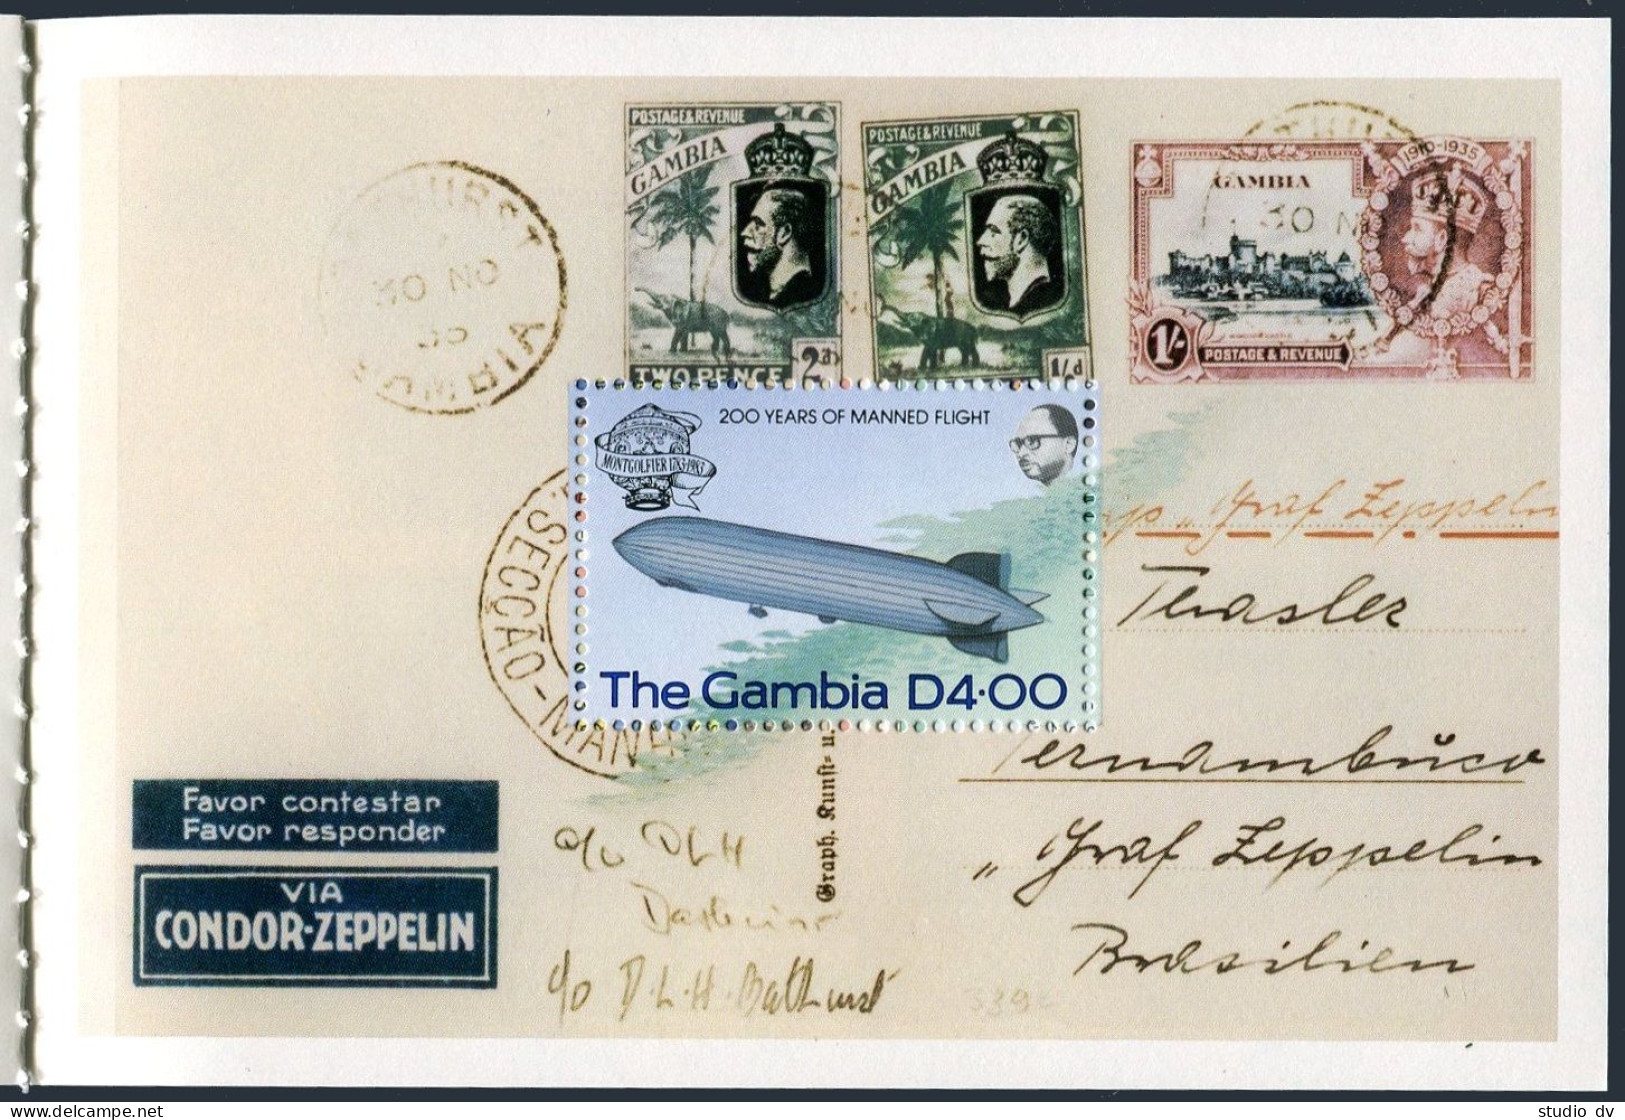 Gambia 493-497 Booklet, MNH. Manned Flight-200, 1983. Zeppelin,Balloon,Airplane. - Gambie (1965-...)